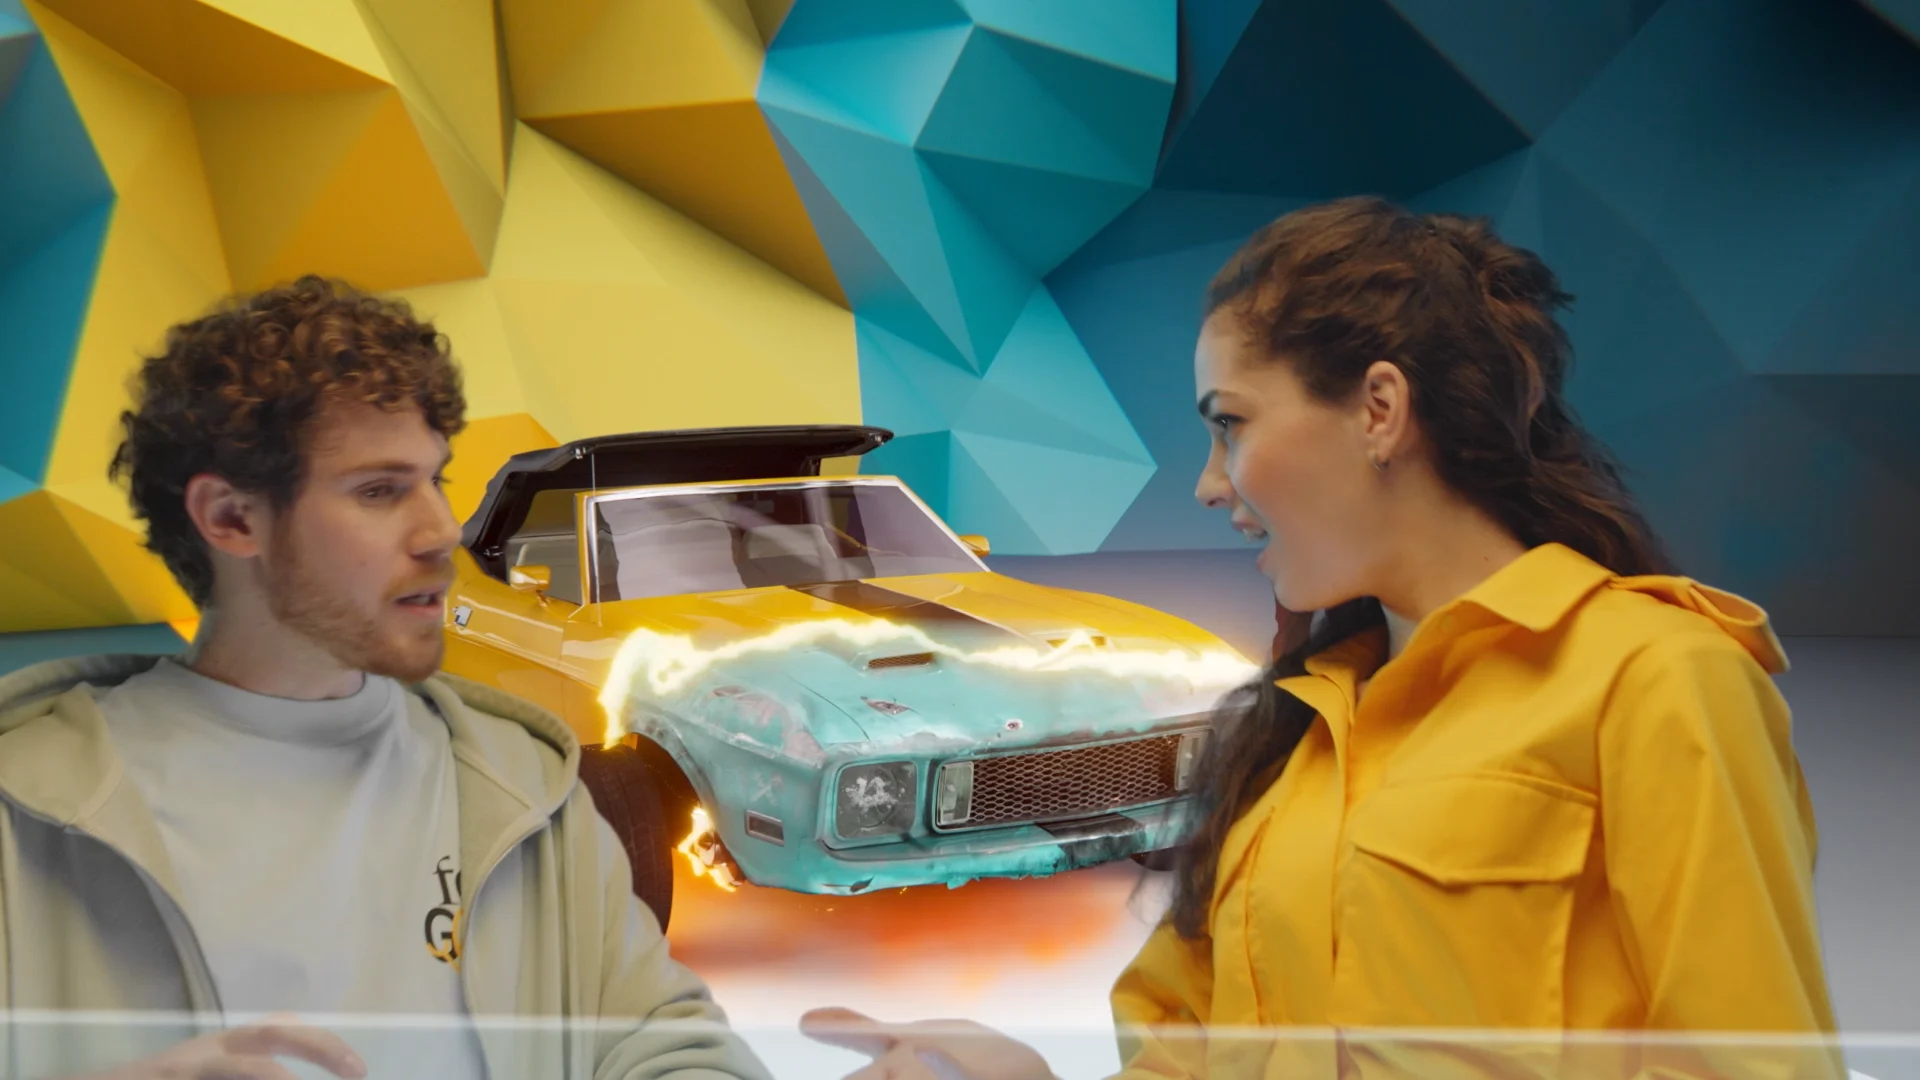 an old turquoise chubby car transforming into a new yellow ford mustang cabrio in a virtual room with yellow and turquoise polygone walls. a girl and a boy standing in front of the transforming car